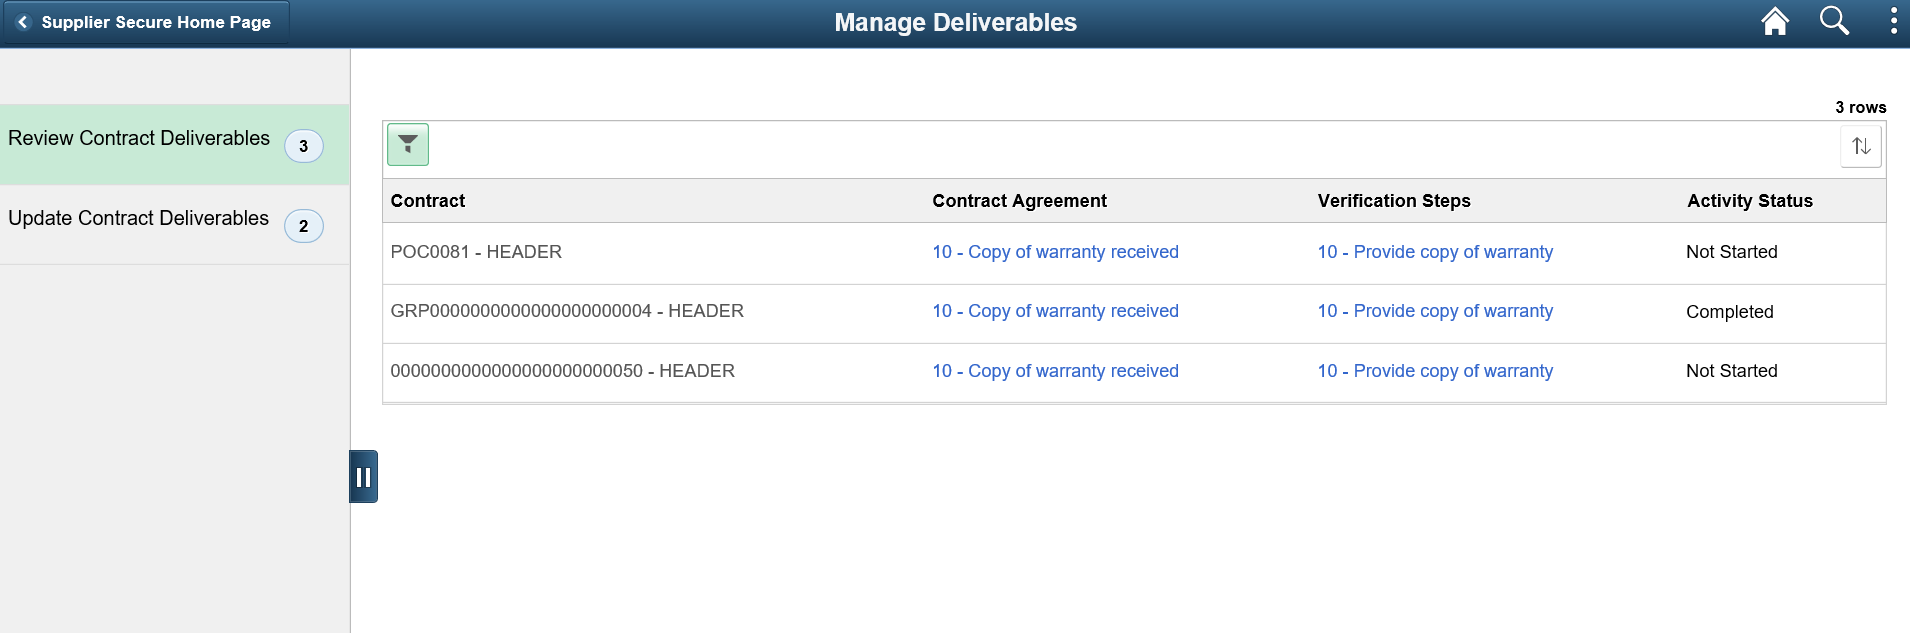 Manage Deliverables Review Contract Deliverables page